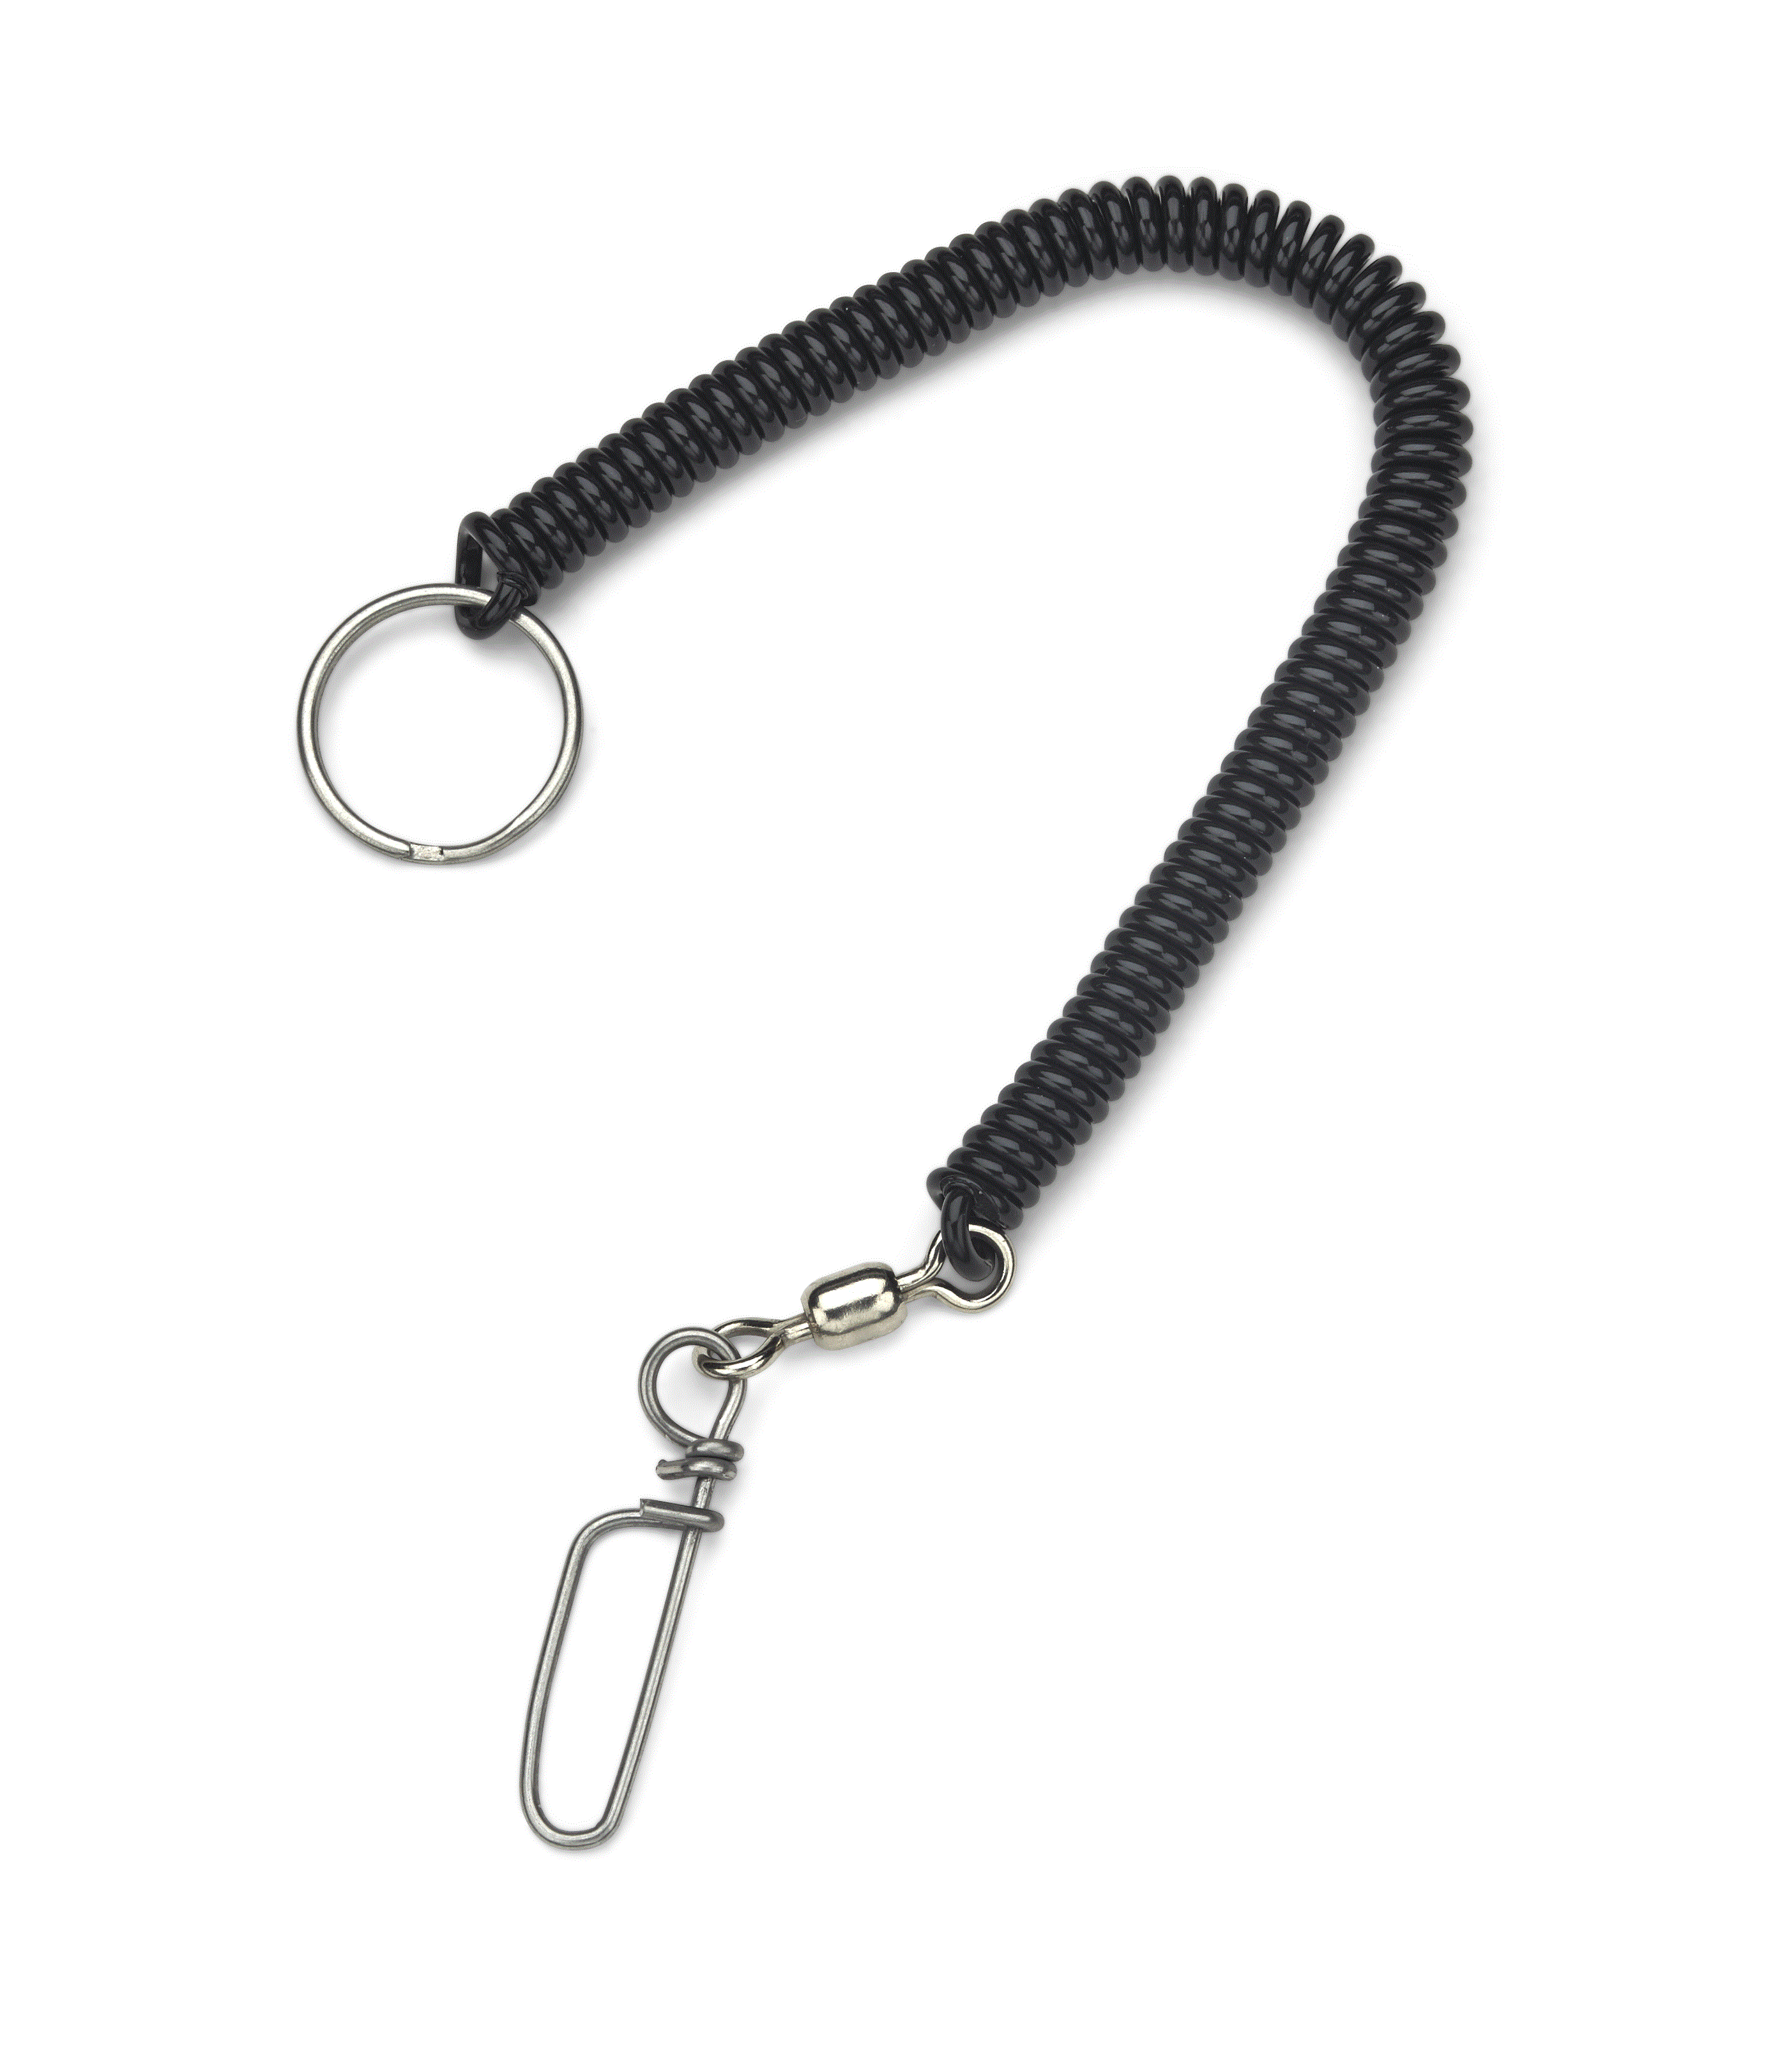 Donnmar Coiled Tether w/ Coastlock Snap